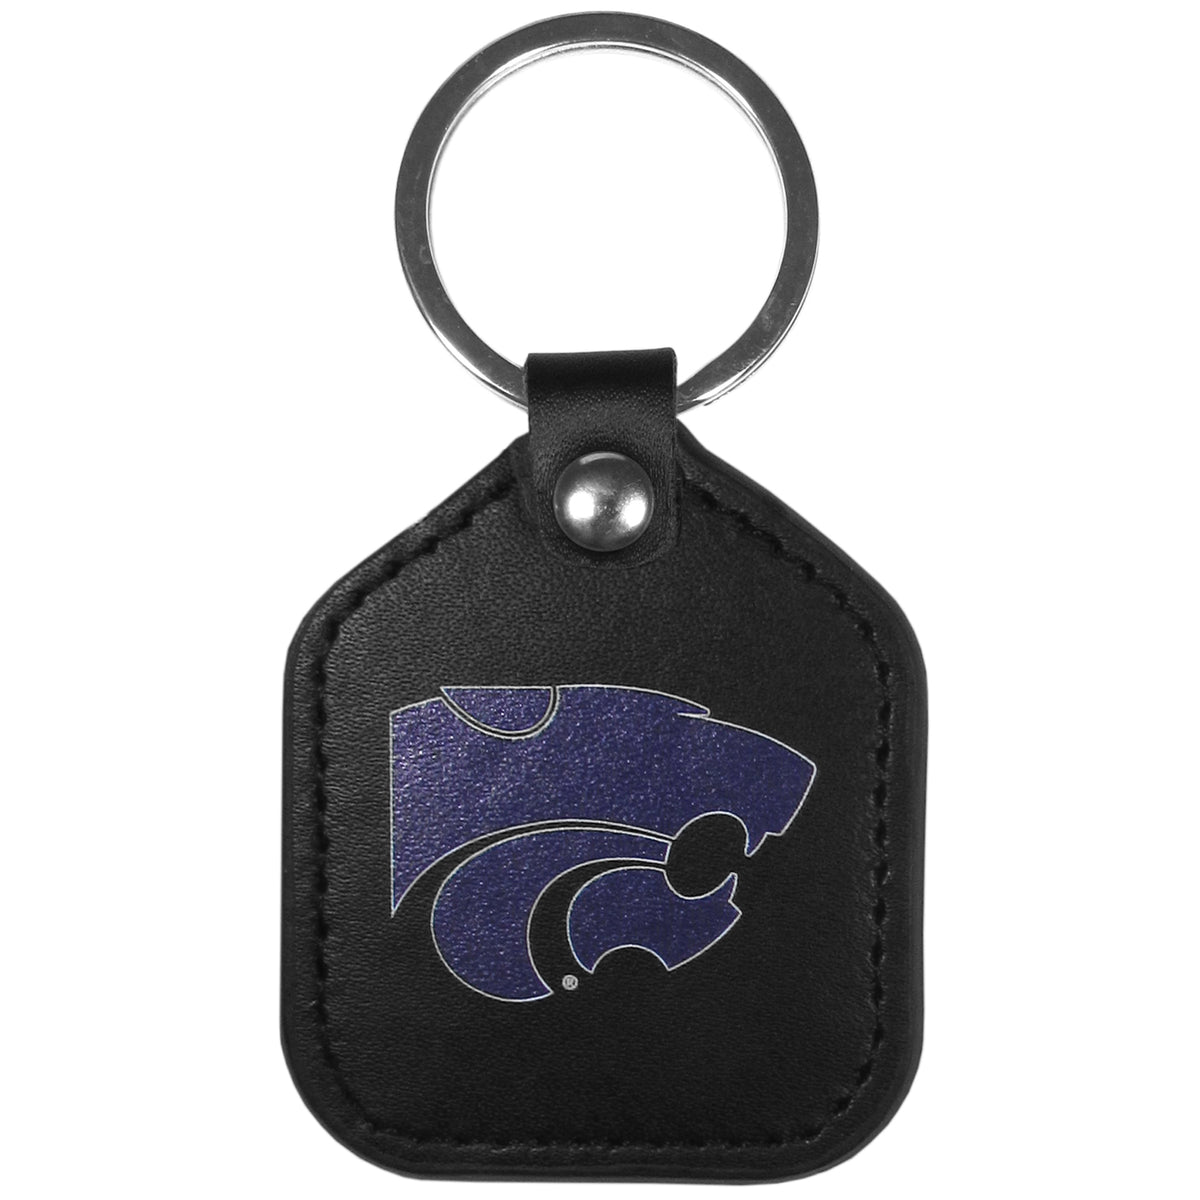 Kansas St. Wildcats Leather Square Key Chains